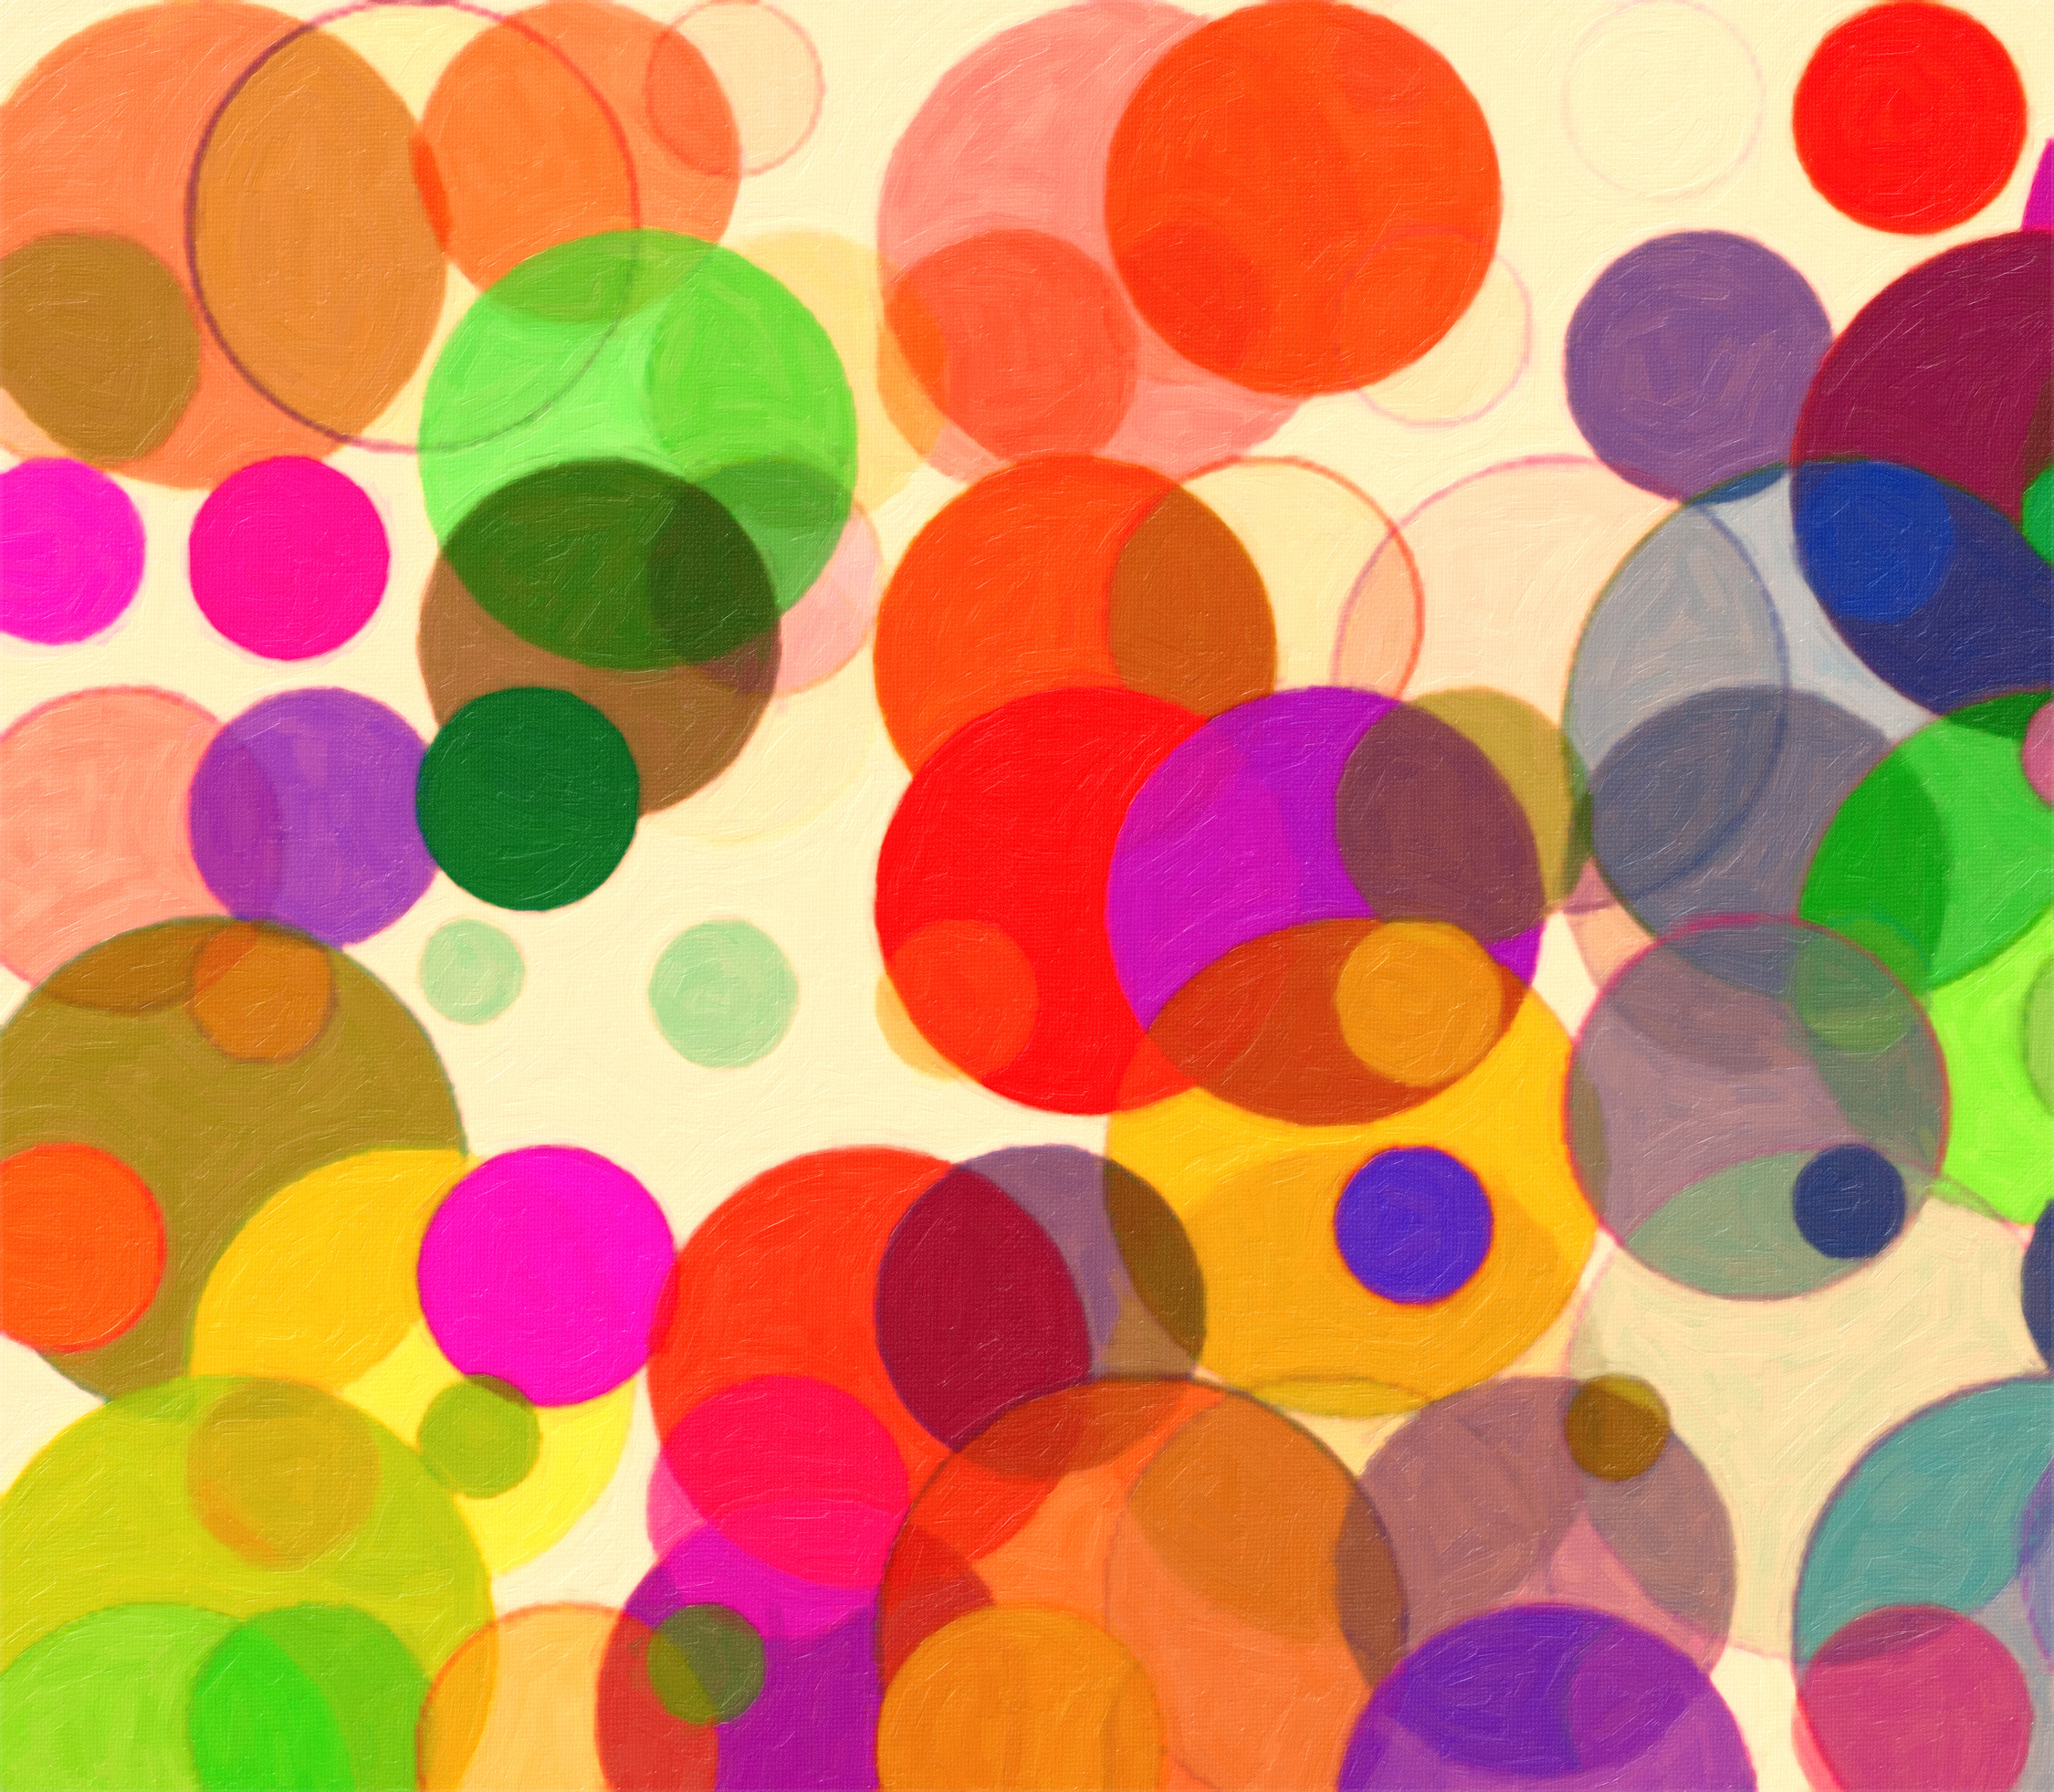 Background of colorful circles